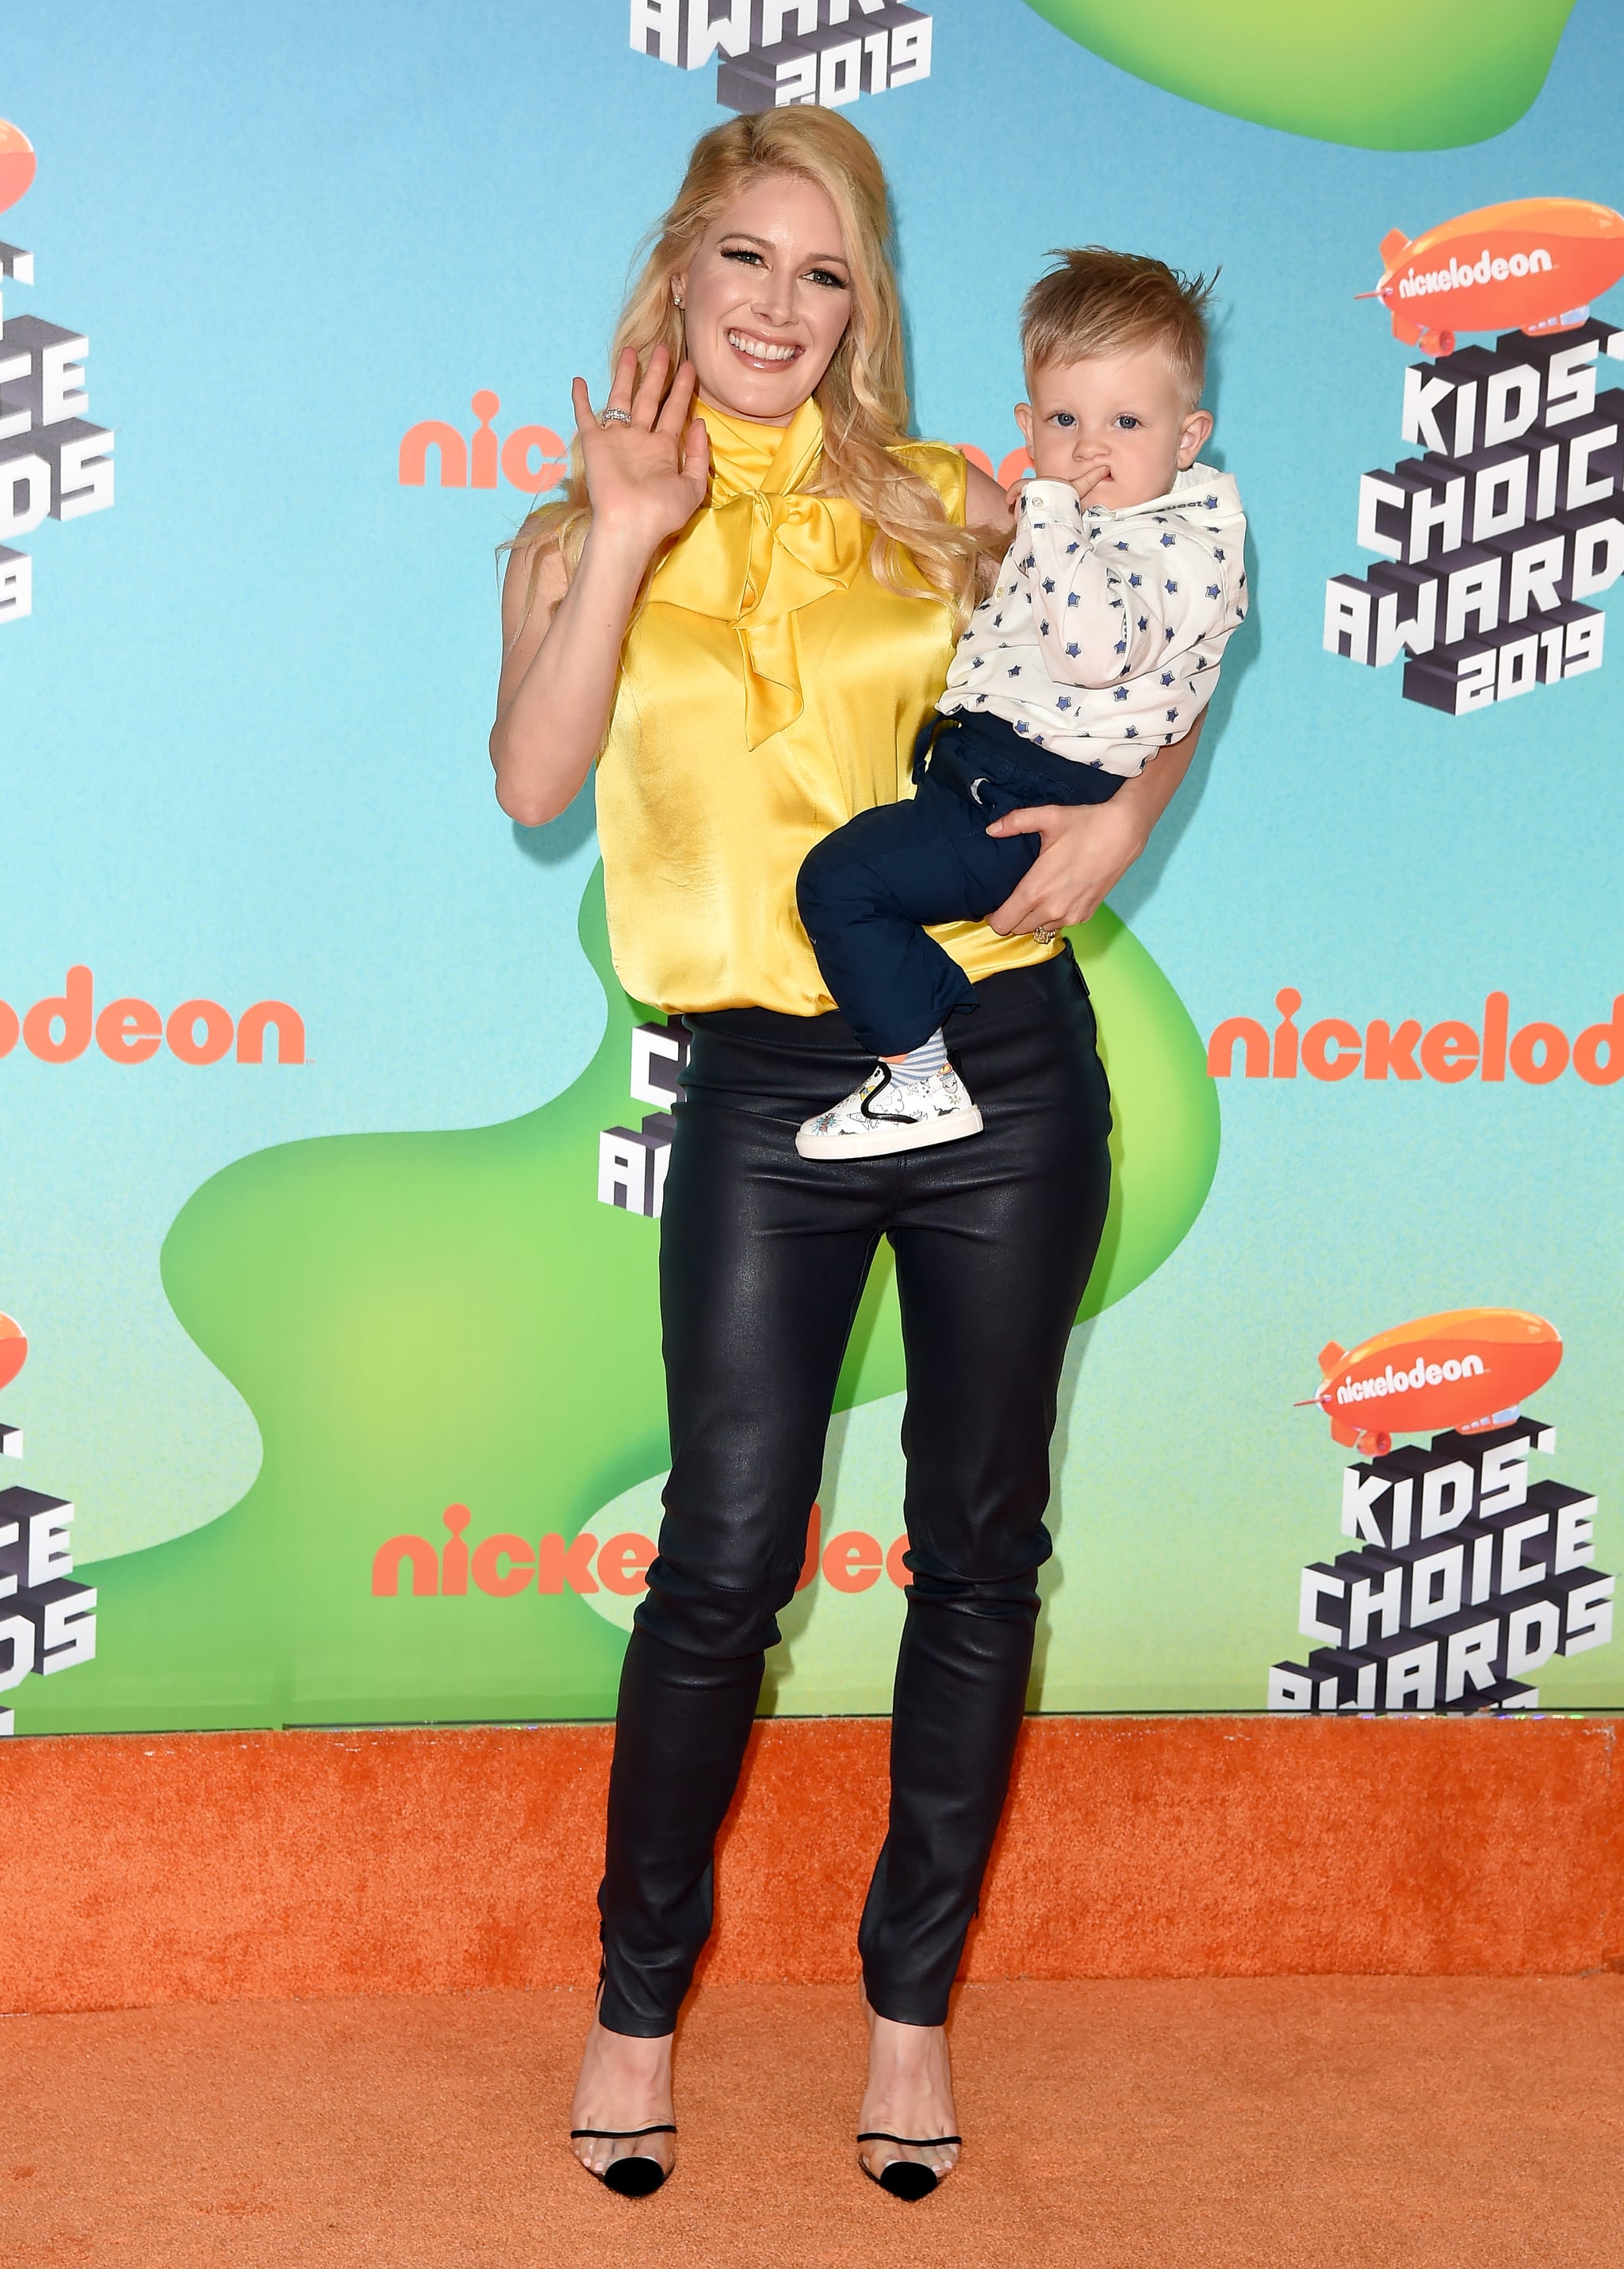 LOS ANGELES, CALIFORNIA - MARCH 23: Heidi Montag and Gunner Stone attend Nickelodeon's 2019 Kids' Choice Awards at Galen Centre on March 23, 2019 in Los Angeles, California. (Photo by Axelle/Bauer-Griffin/FilmMagic)